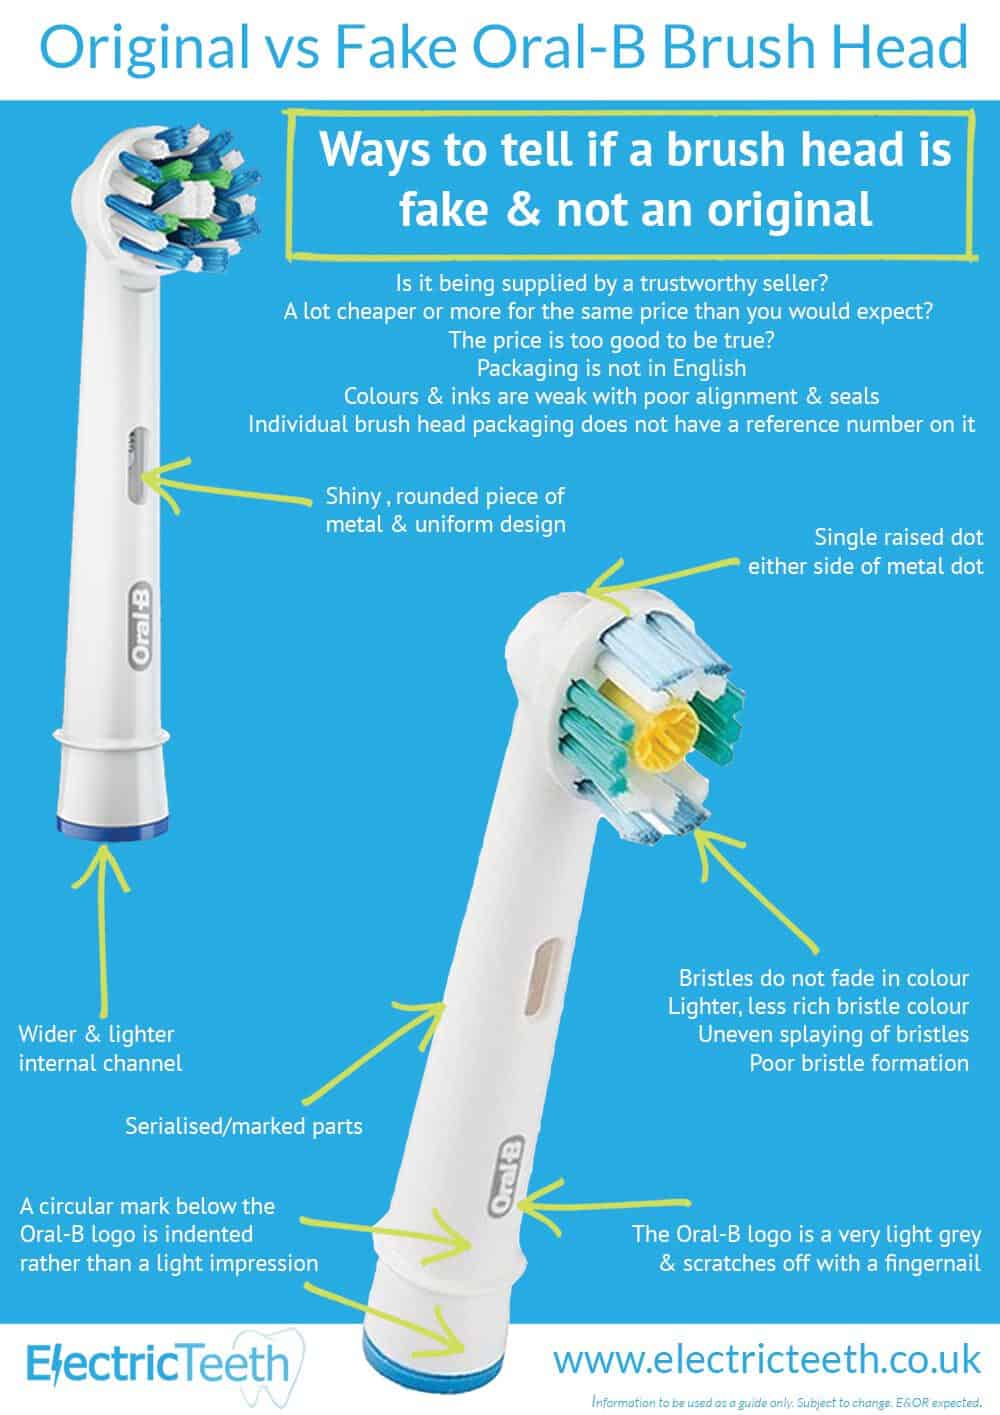 how-to-tell-is-an-oral-b-brush-head-is-fake-infographic_v2.jpg